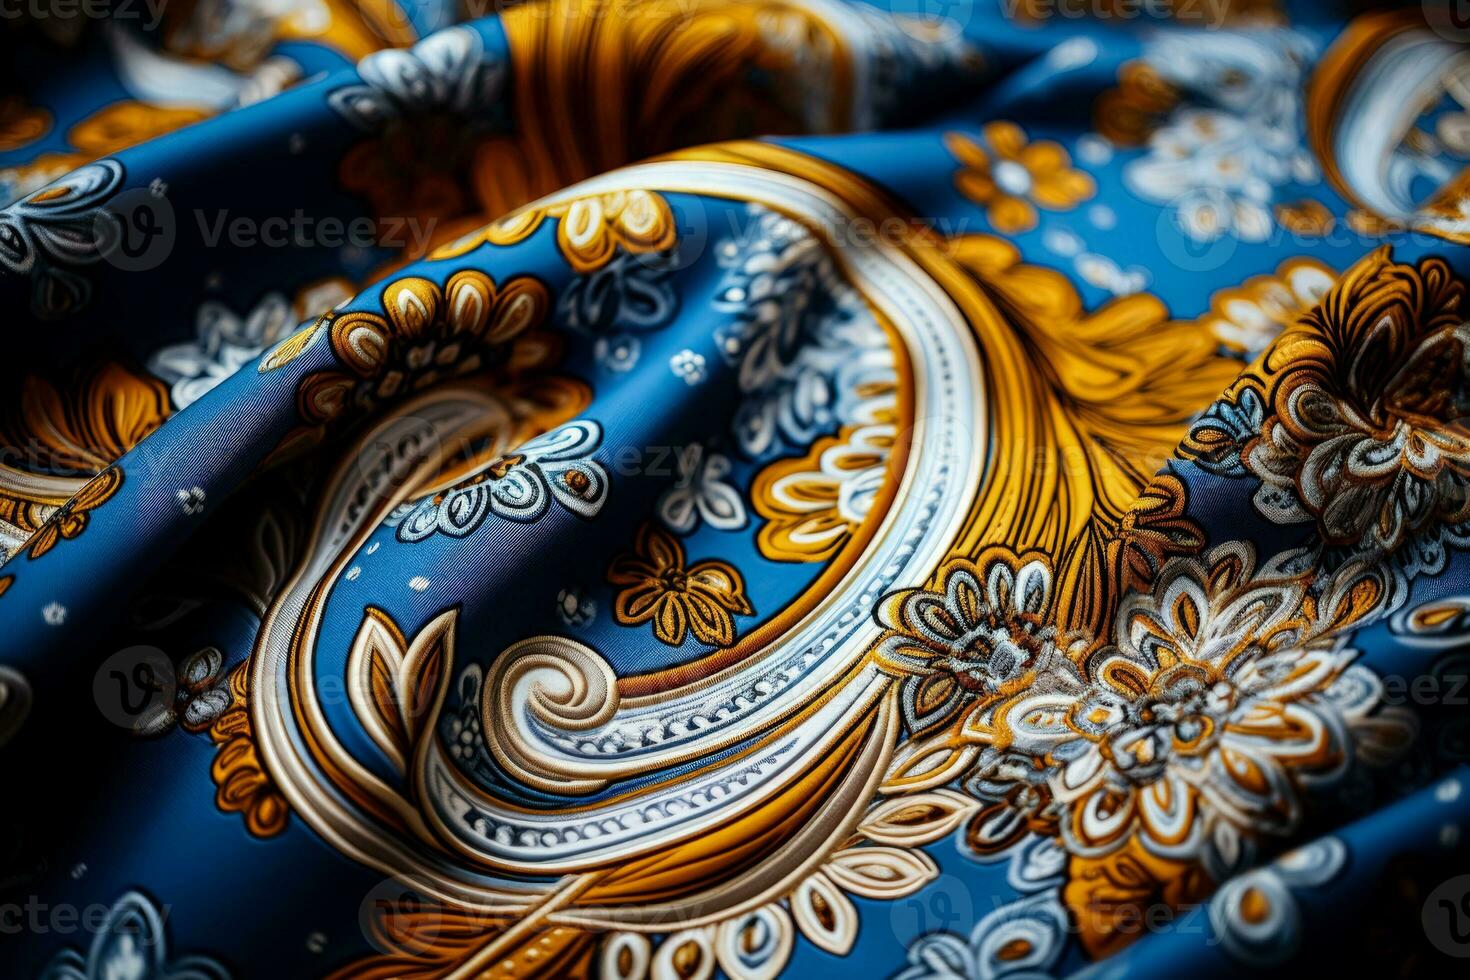 High detailed imagery revealing the intricate motifs of paisley patterns on textiles photo